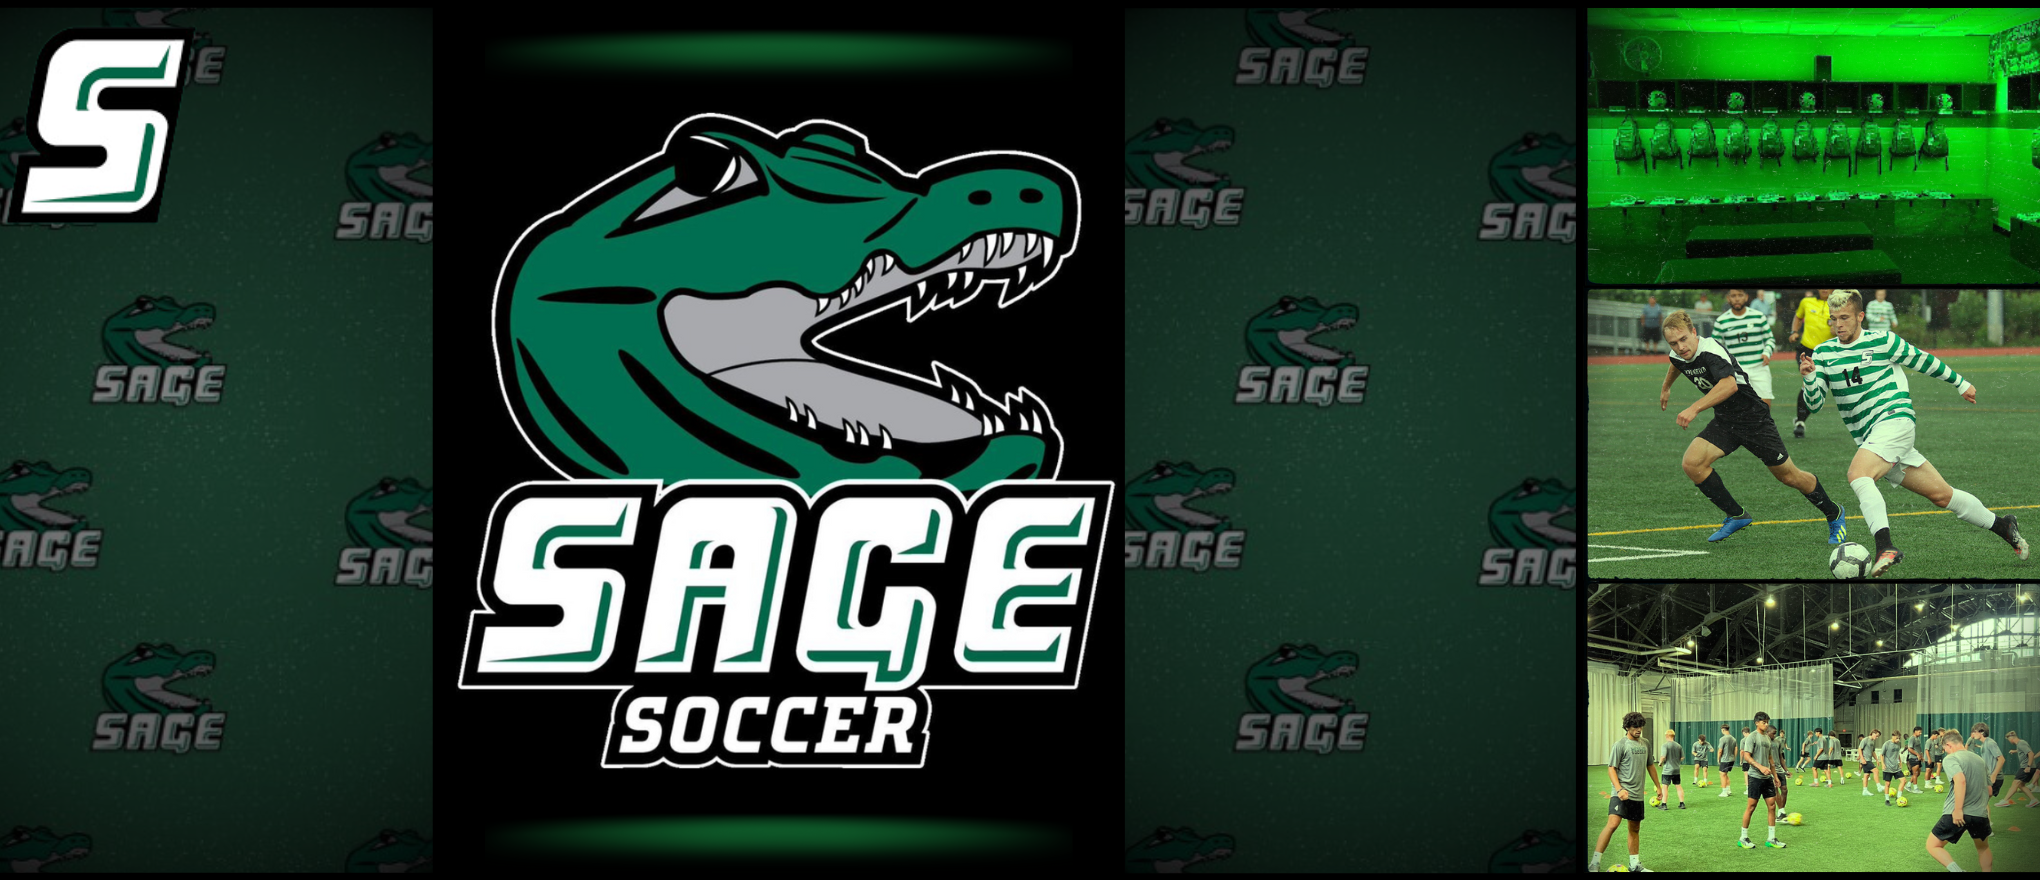 Russell Sage Soccer